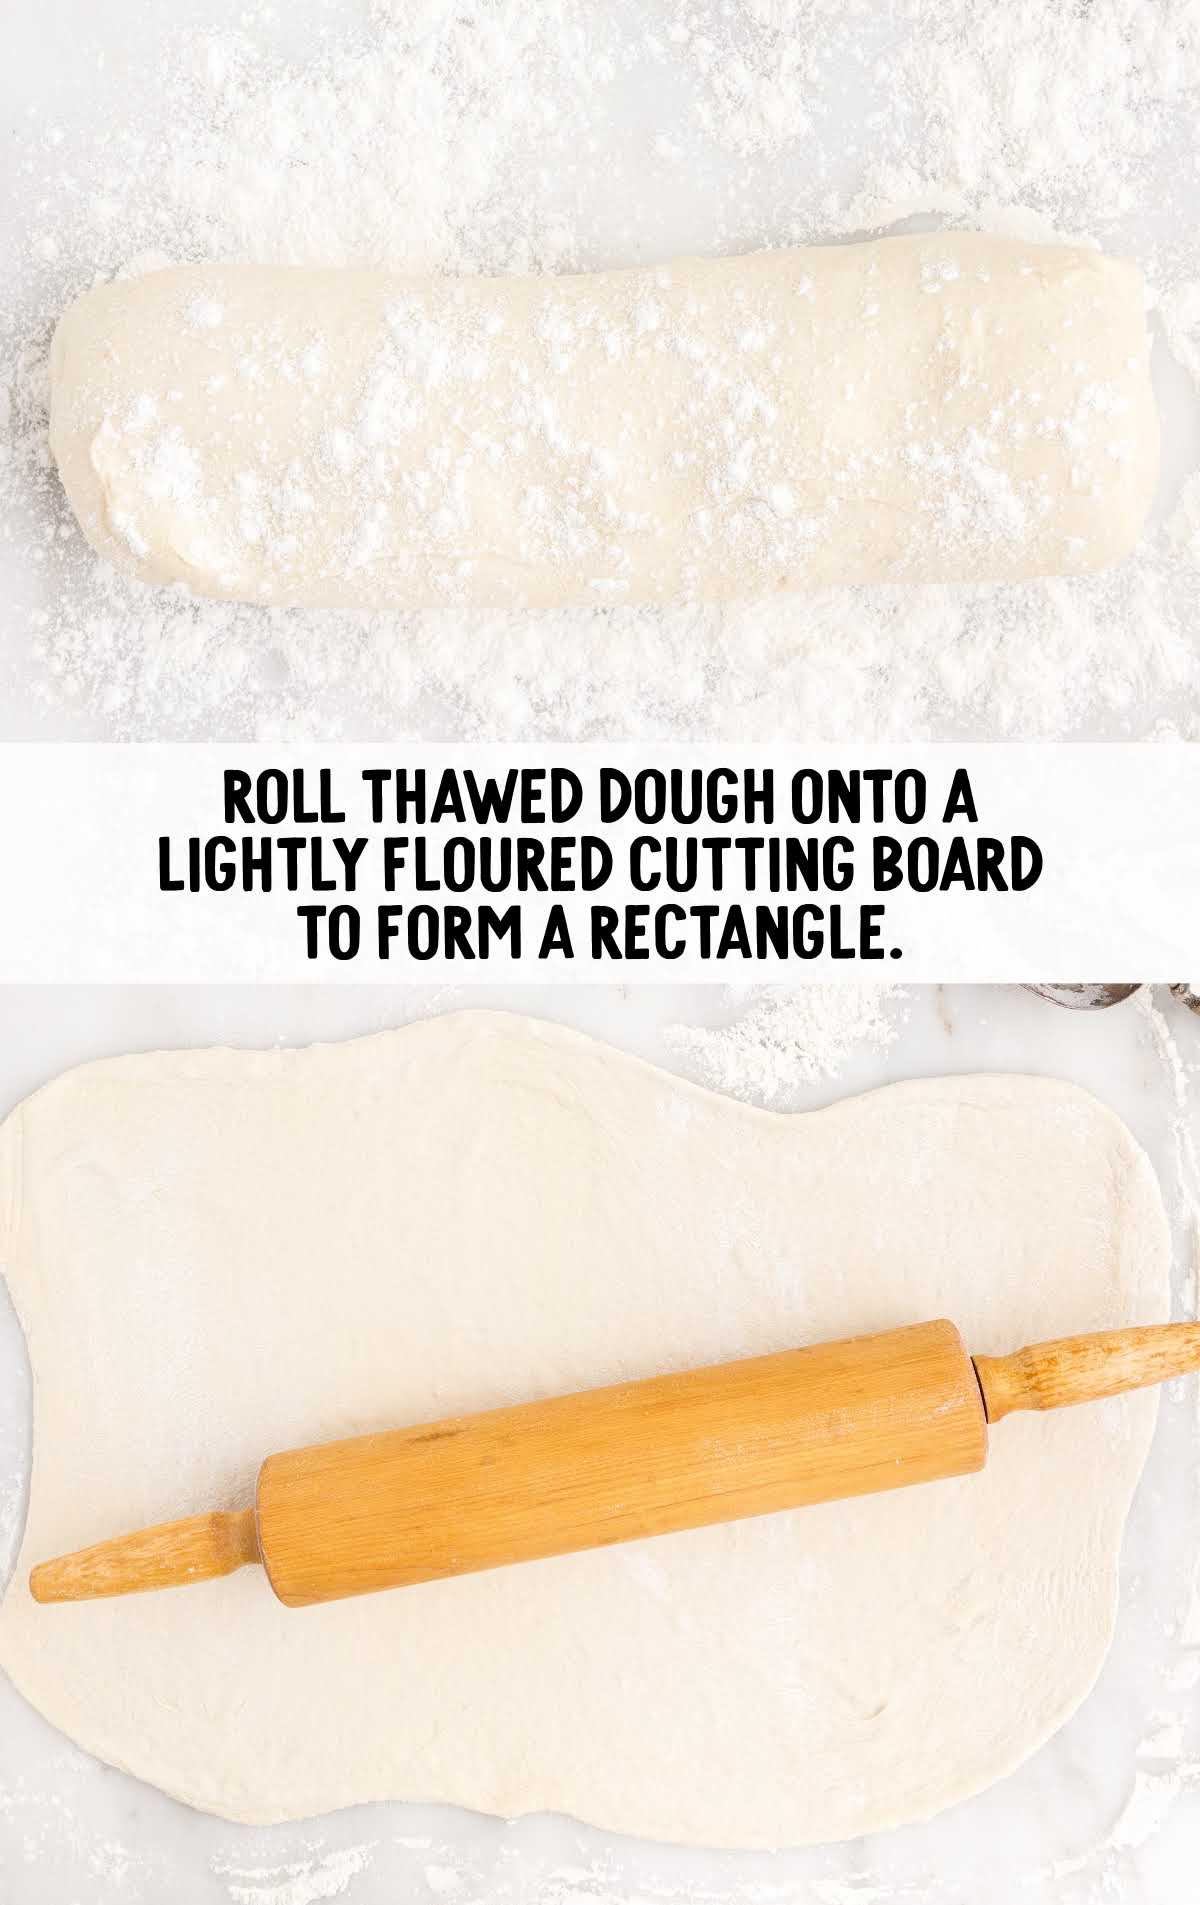 dough rolled onto a floured cutting board and form a rectangle